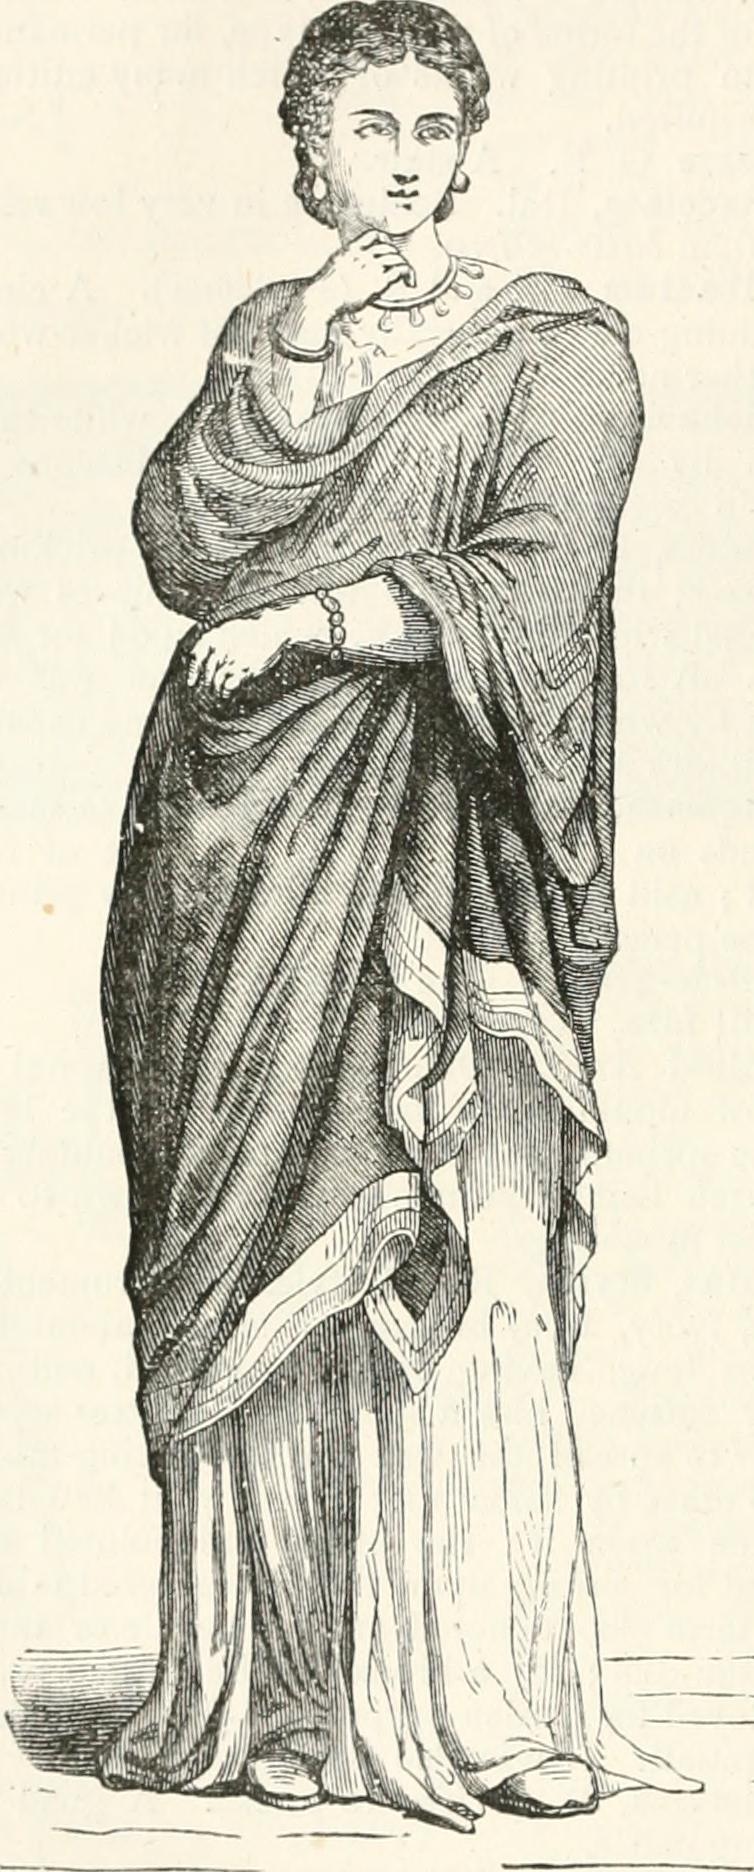 Image from page 317 of "An illustrated dictionary of words used in art and archaeology. Explaining terms frequently used in works on architecture, arms, bronzes, Christian art, colour, costume, decoration, devices, emblems, heraldry, lace, personal orname